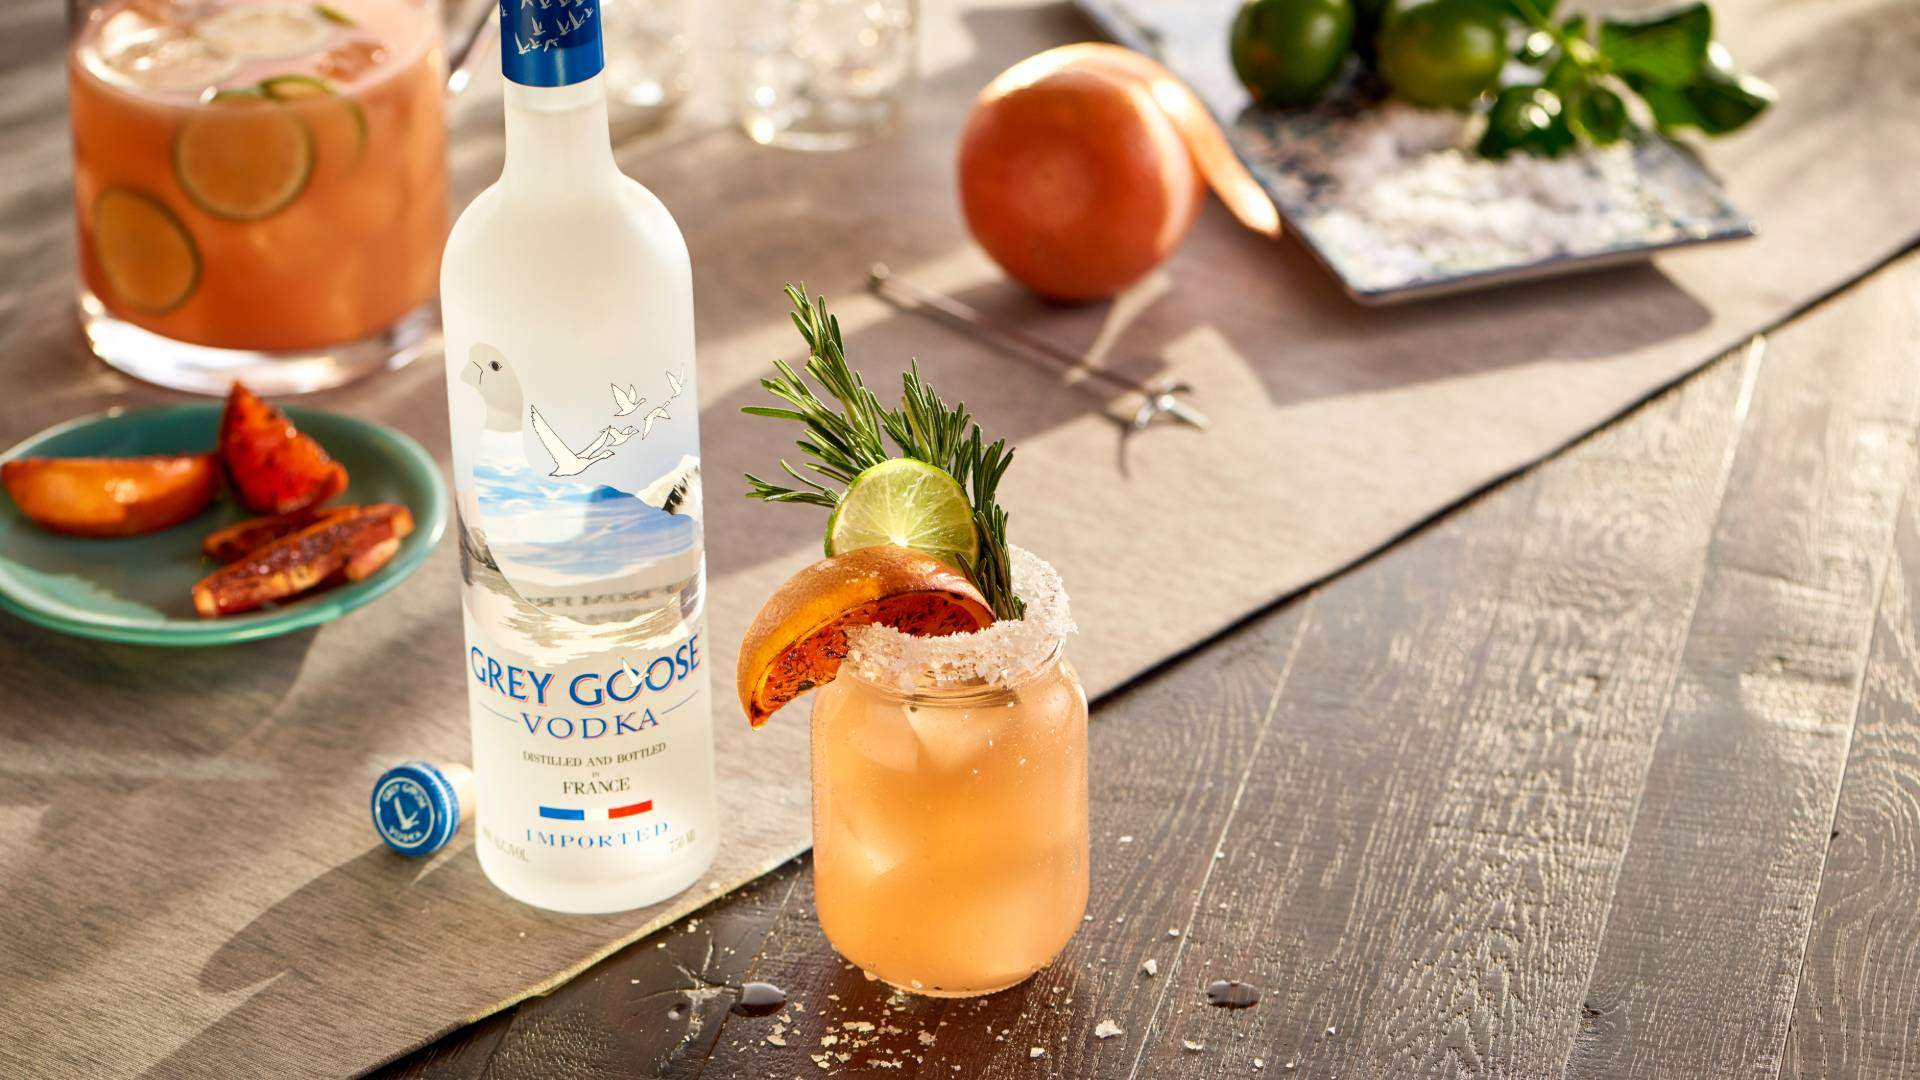 Cocktail and bottle of Grey Goose